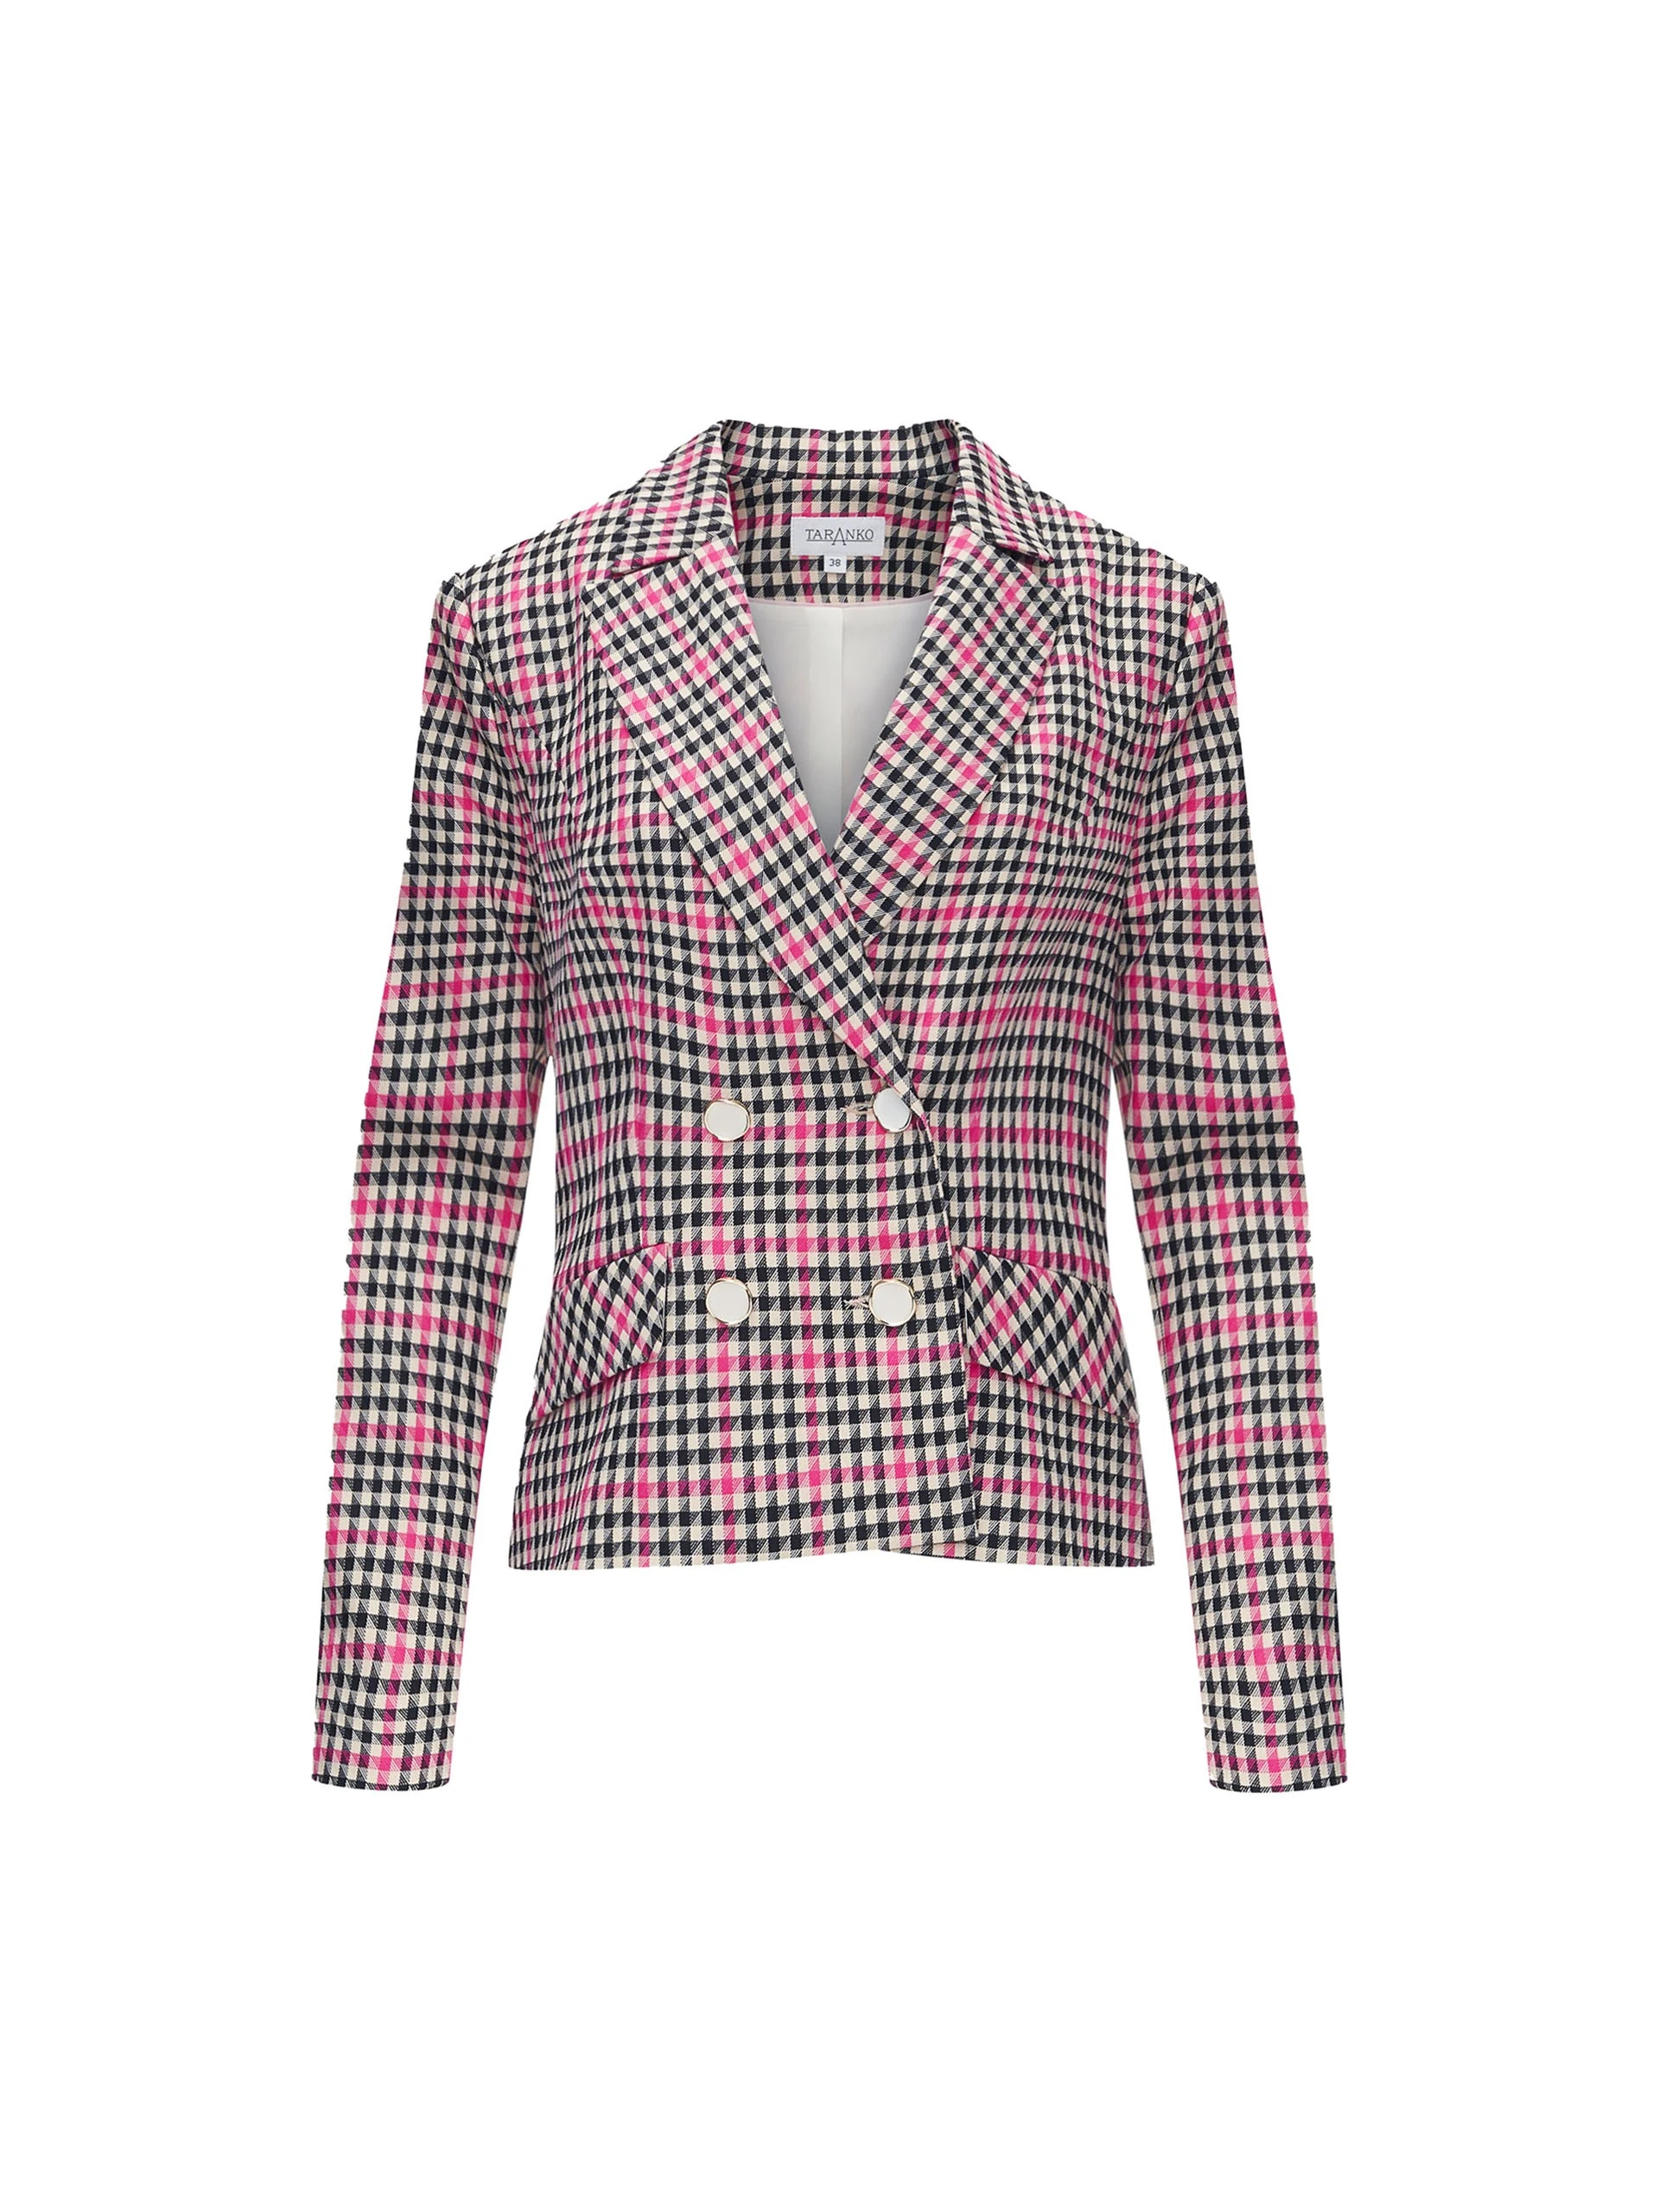 DOUBLE-BREASTED HOUNDSTOOTH JACKET